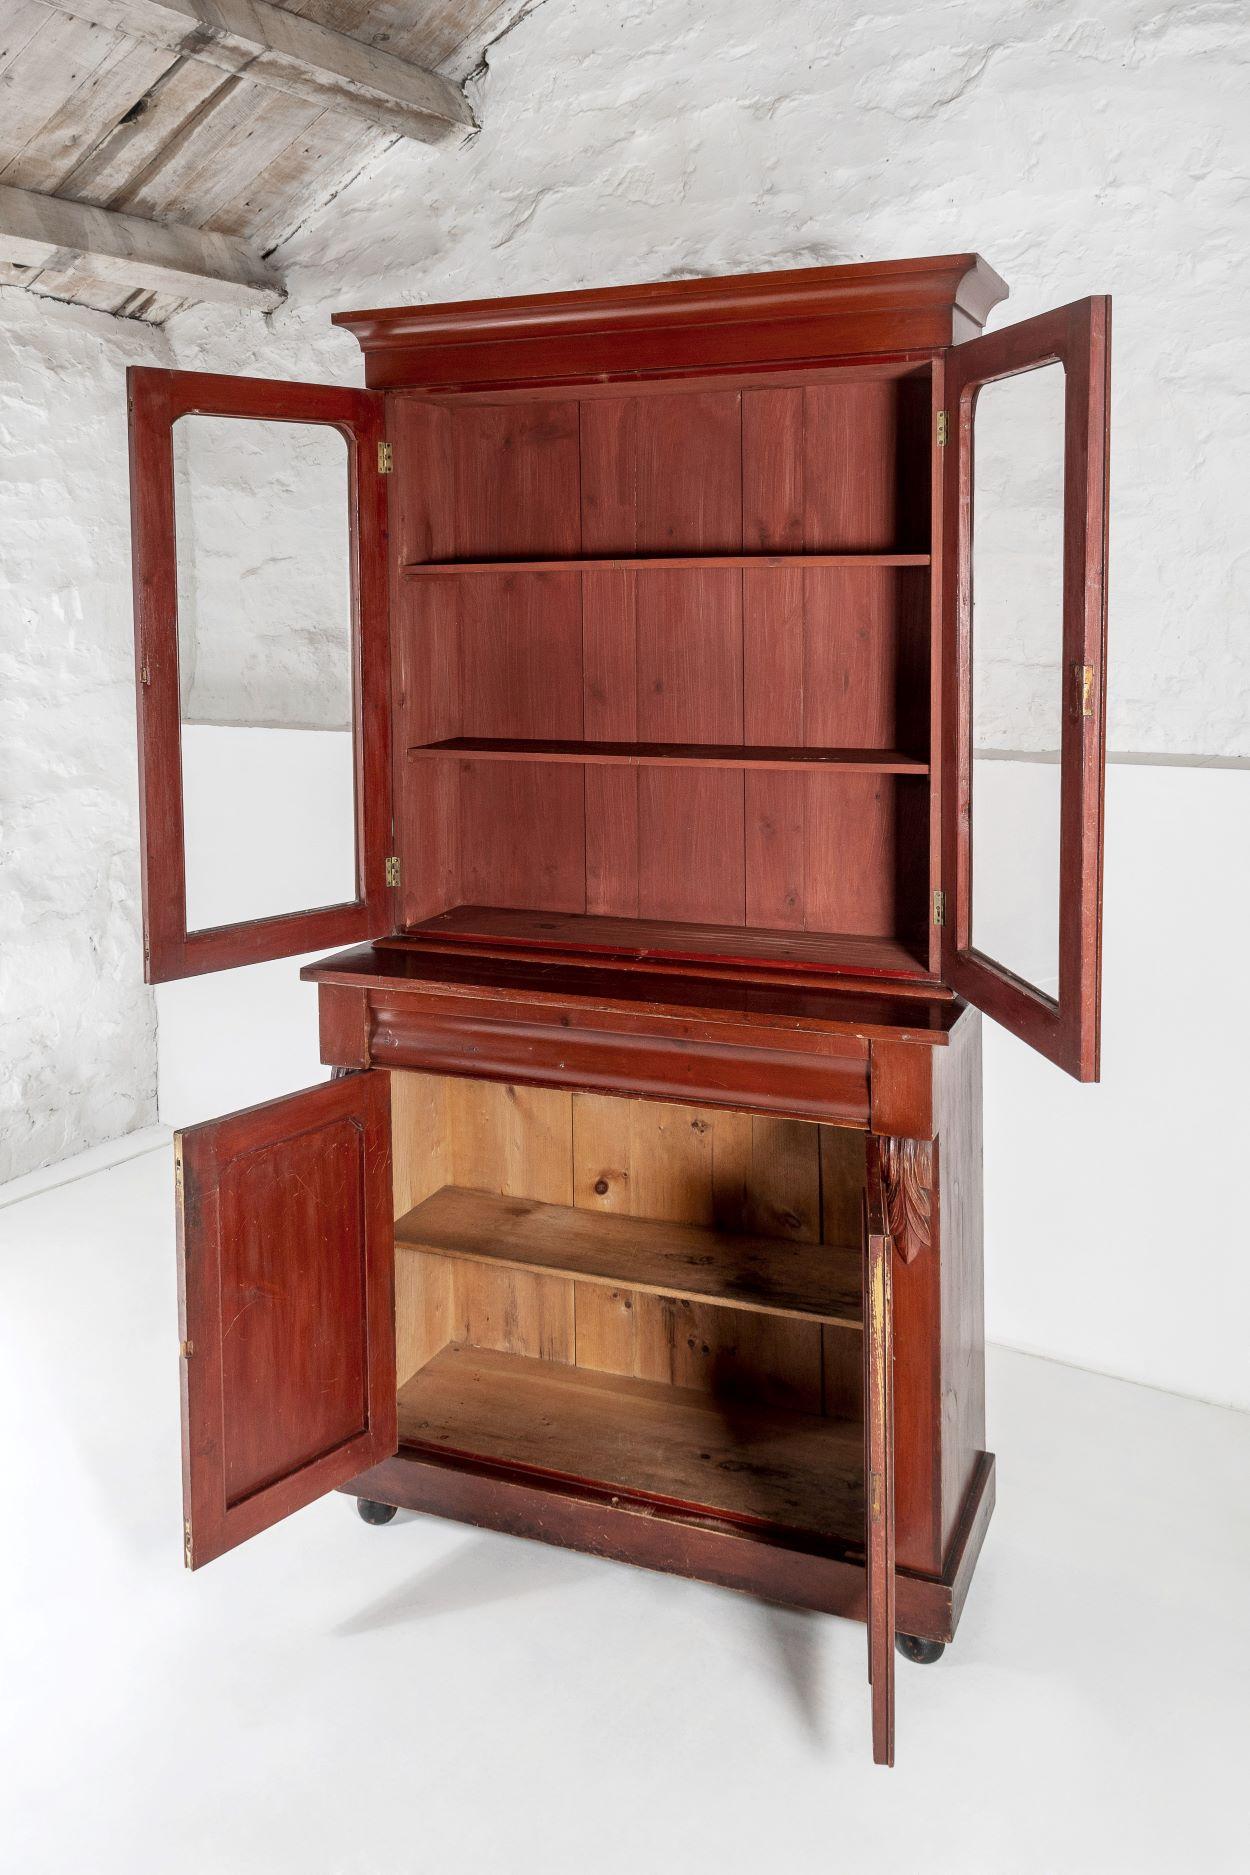 Rococo Revival Tall Victorian Dresser Unit Bookcase with Original Glazing and Red Brown Lacquer For Sale